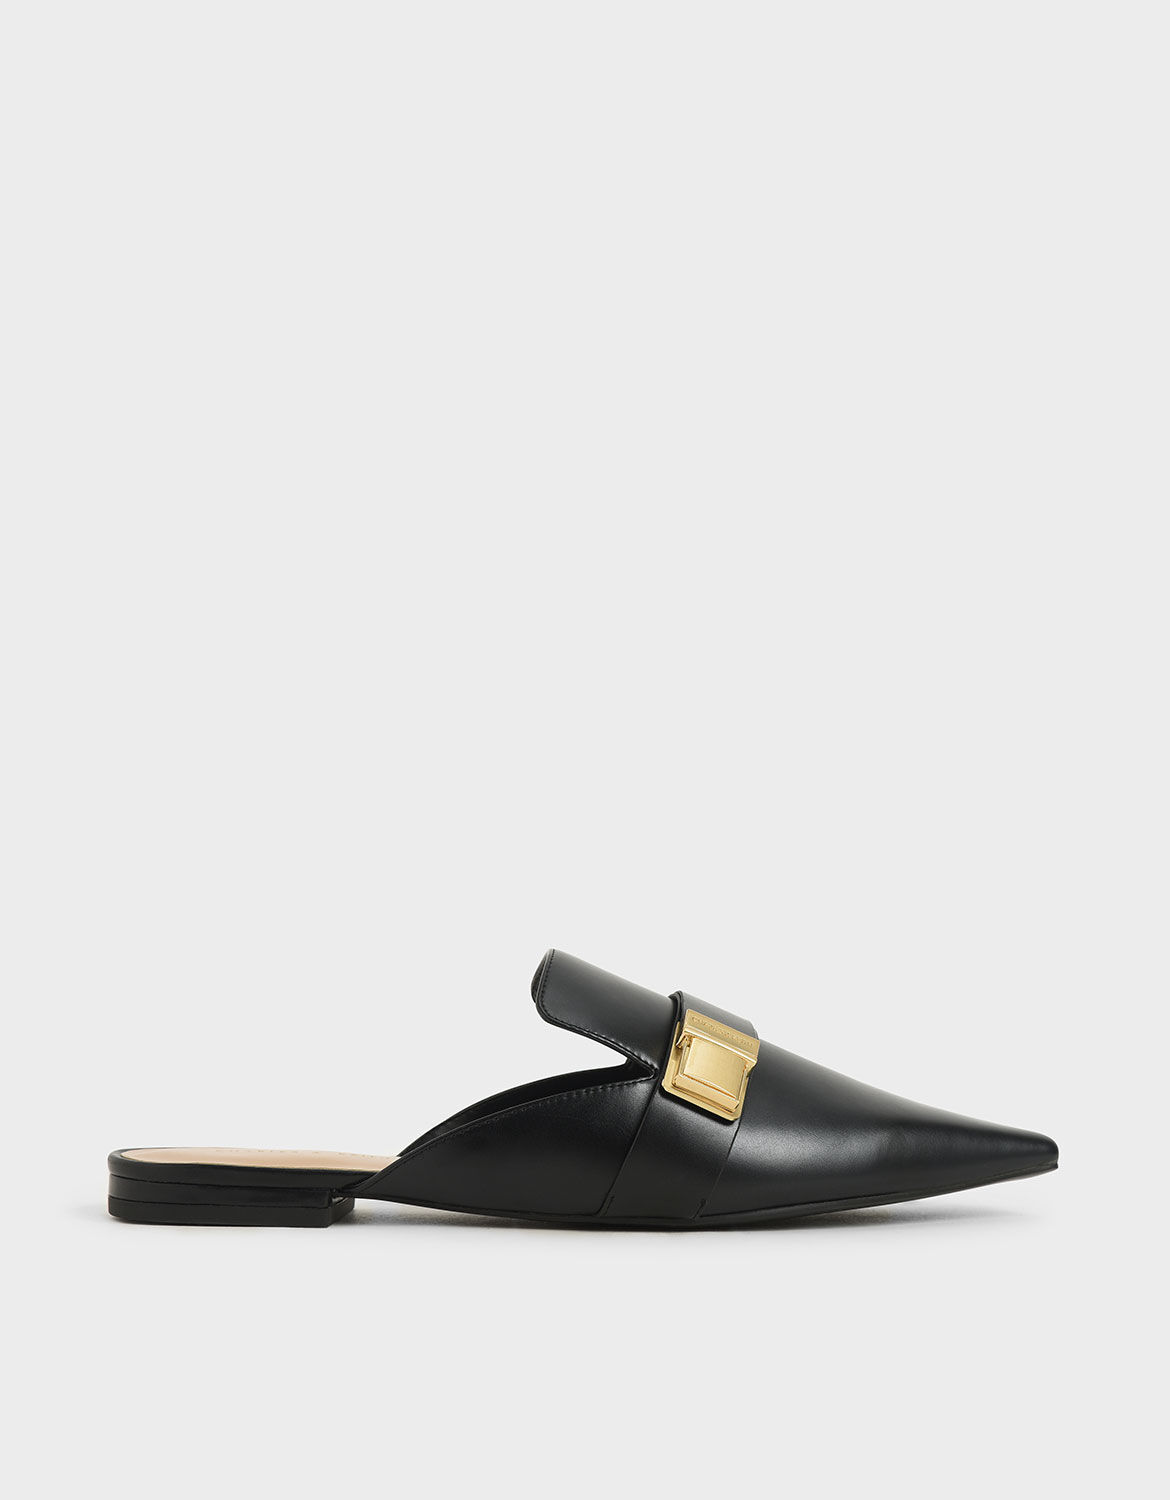 Buckle Loafer Mules | CHARLES \u0026 KEITH VN